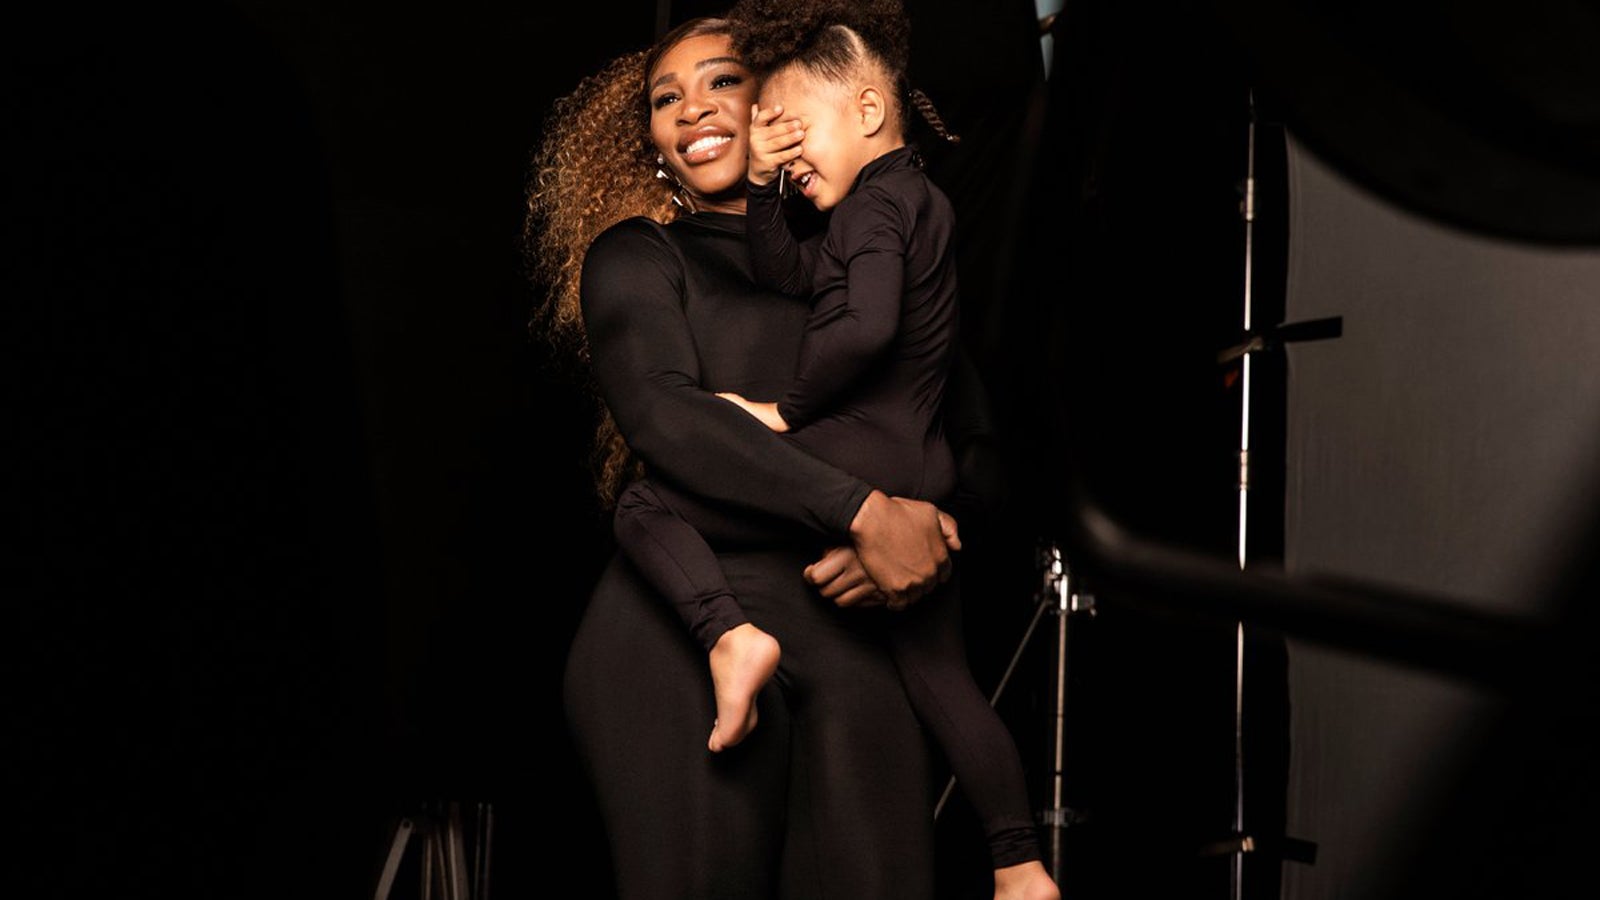 Serena Williams And Daughter Olympia Star In First Fashion Campaign Together For Stuart Weitzman